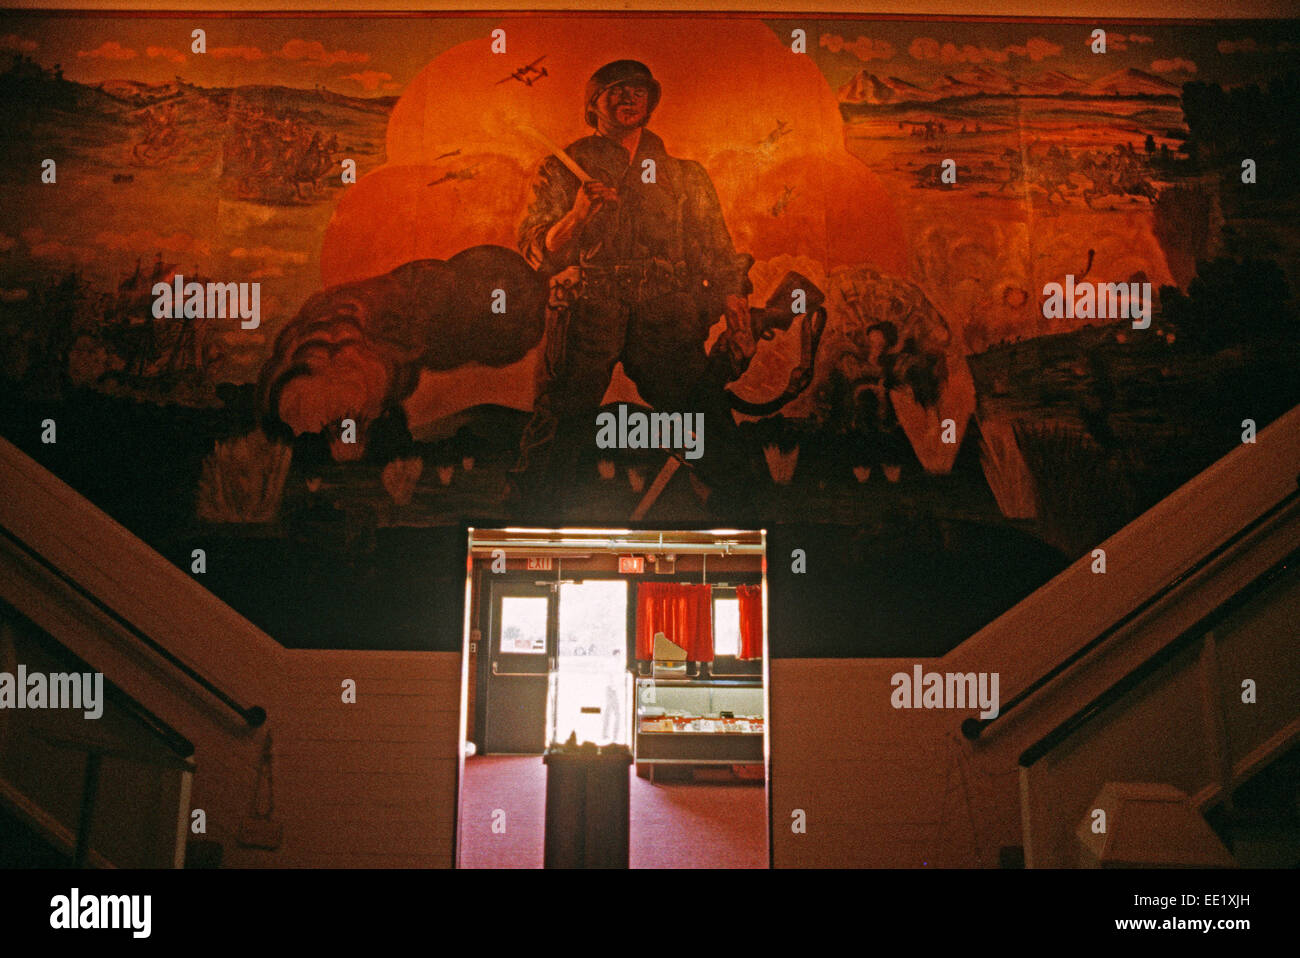 WAR MURAL IN FORT BLISS, UNITED STATES ARMY POST IN TEXAS, USA Stock Photo